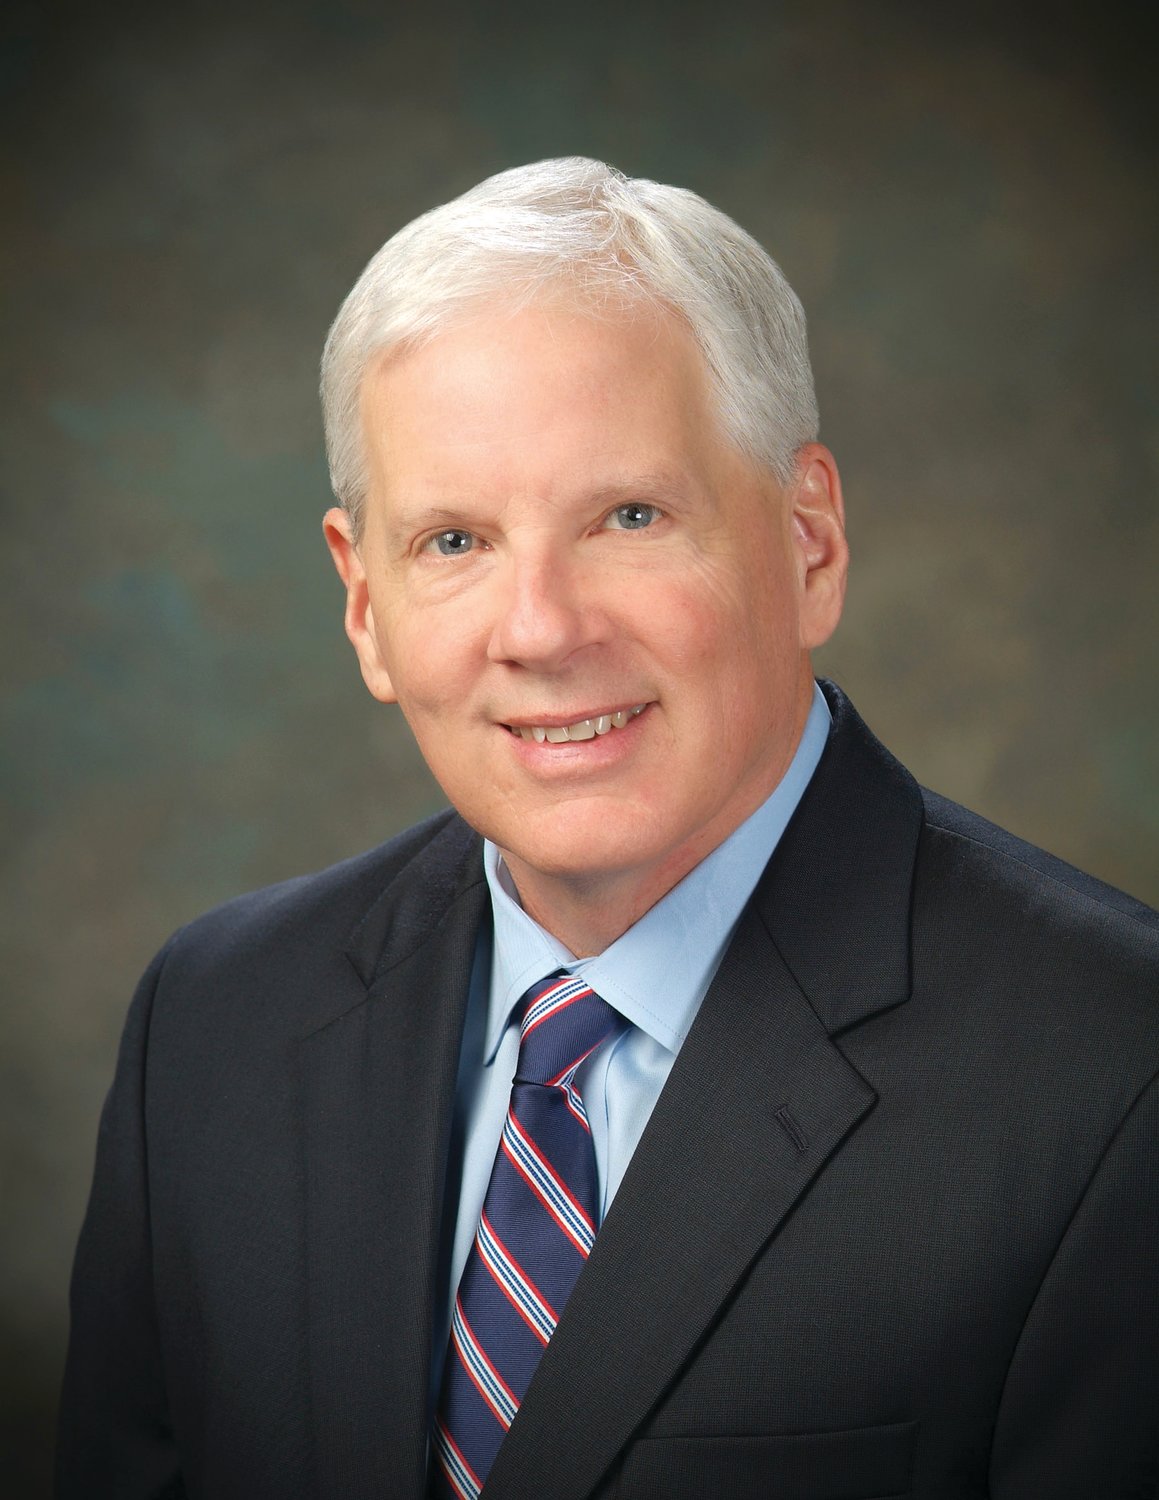 J. Scott Angle is the University of Florida’s Senior Vice President for Agriculture and Natural Resources and leader of the UF Institute of Food and Agricultural Sciences (UF/IFAS).